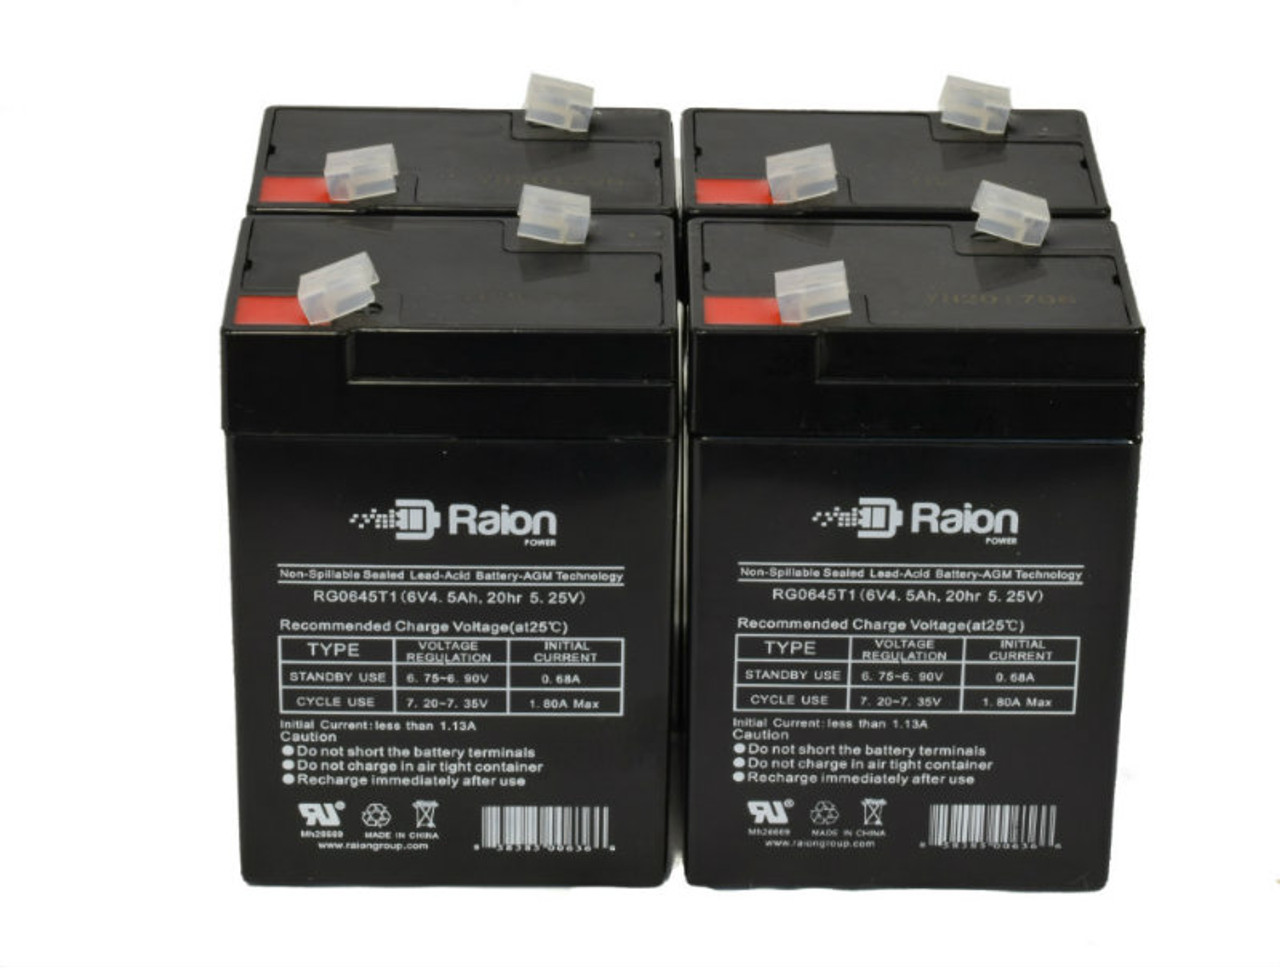 Raion Power 6V 4.5Ah Replacement Emergency Light Battery for Chloride ERS - 4 Pack